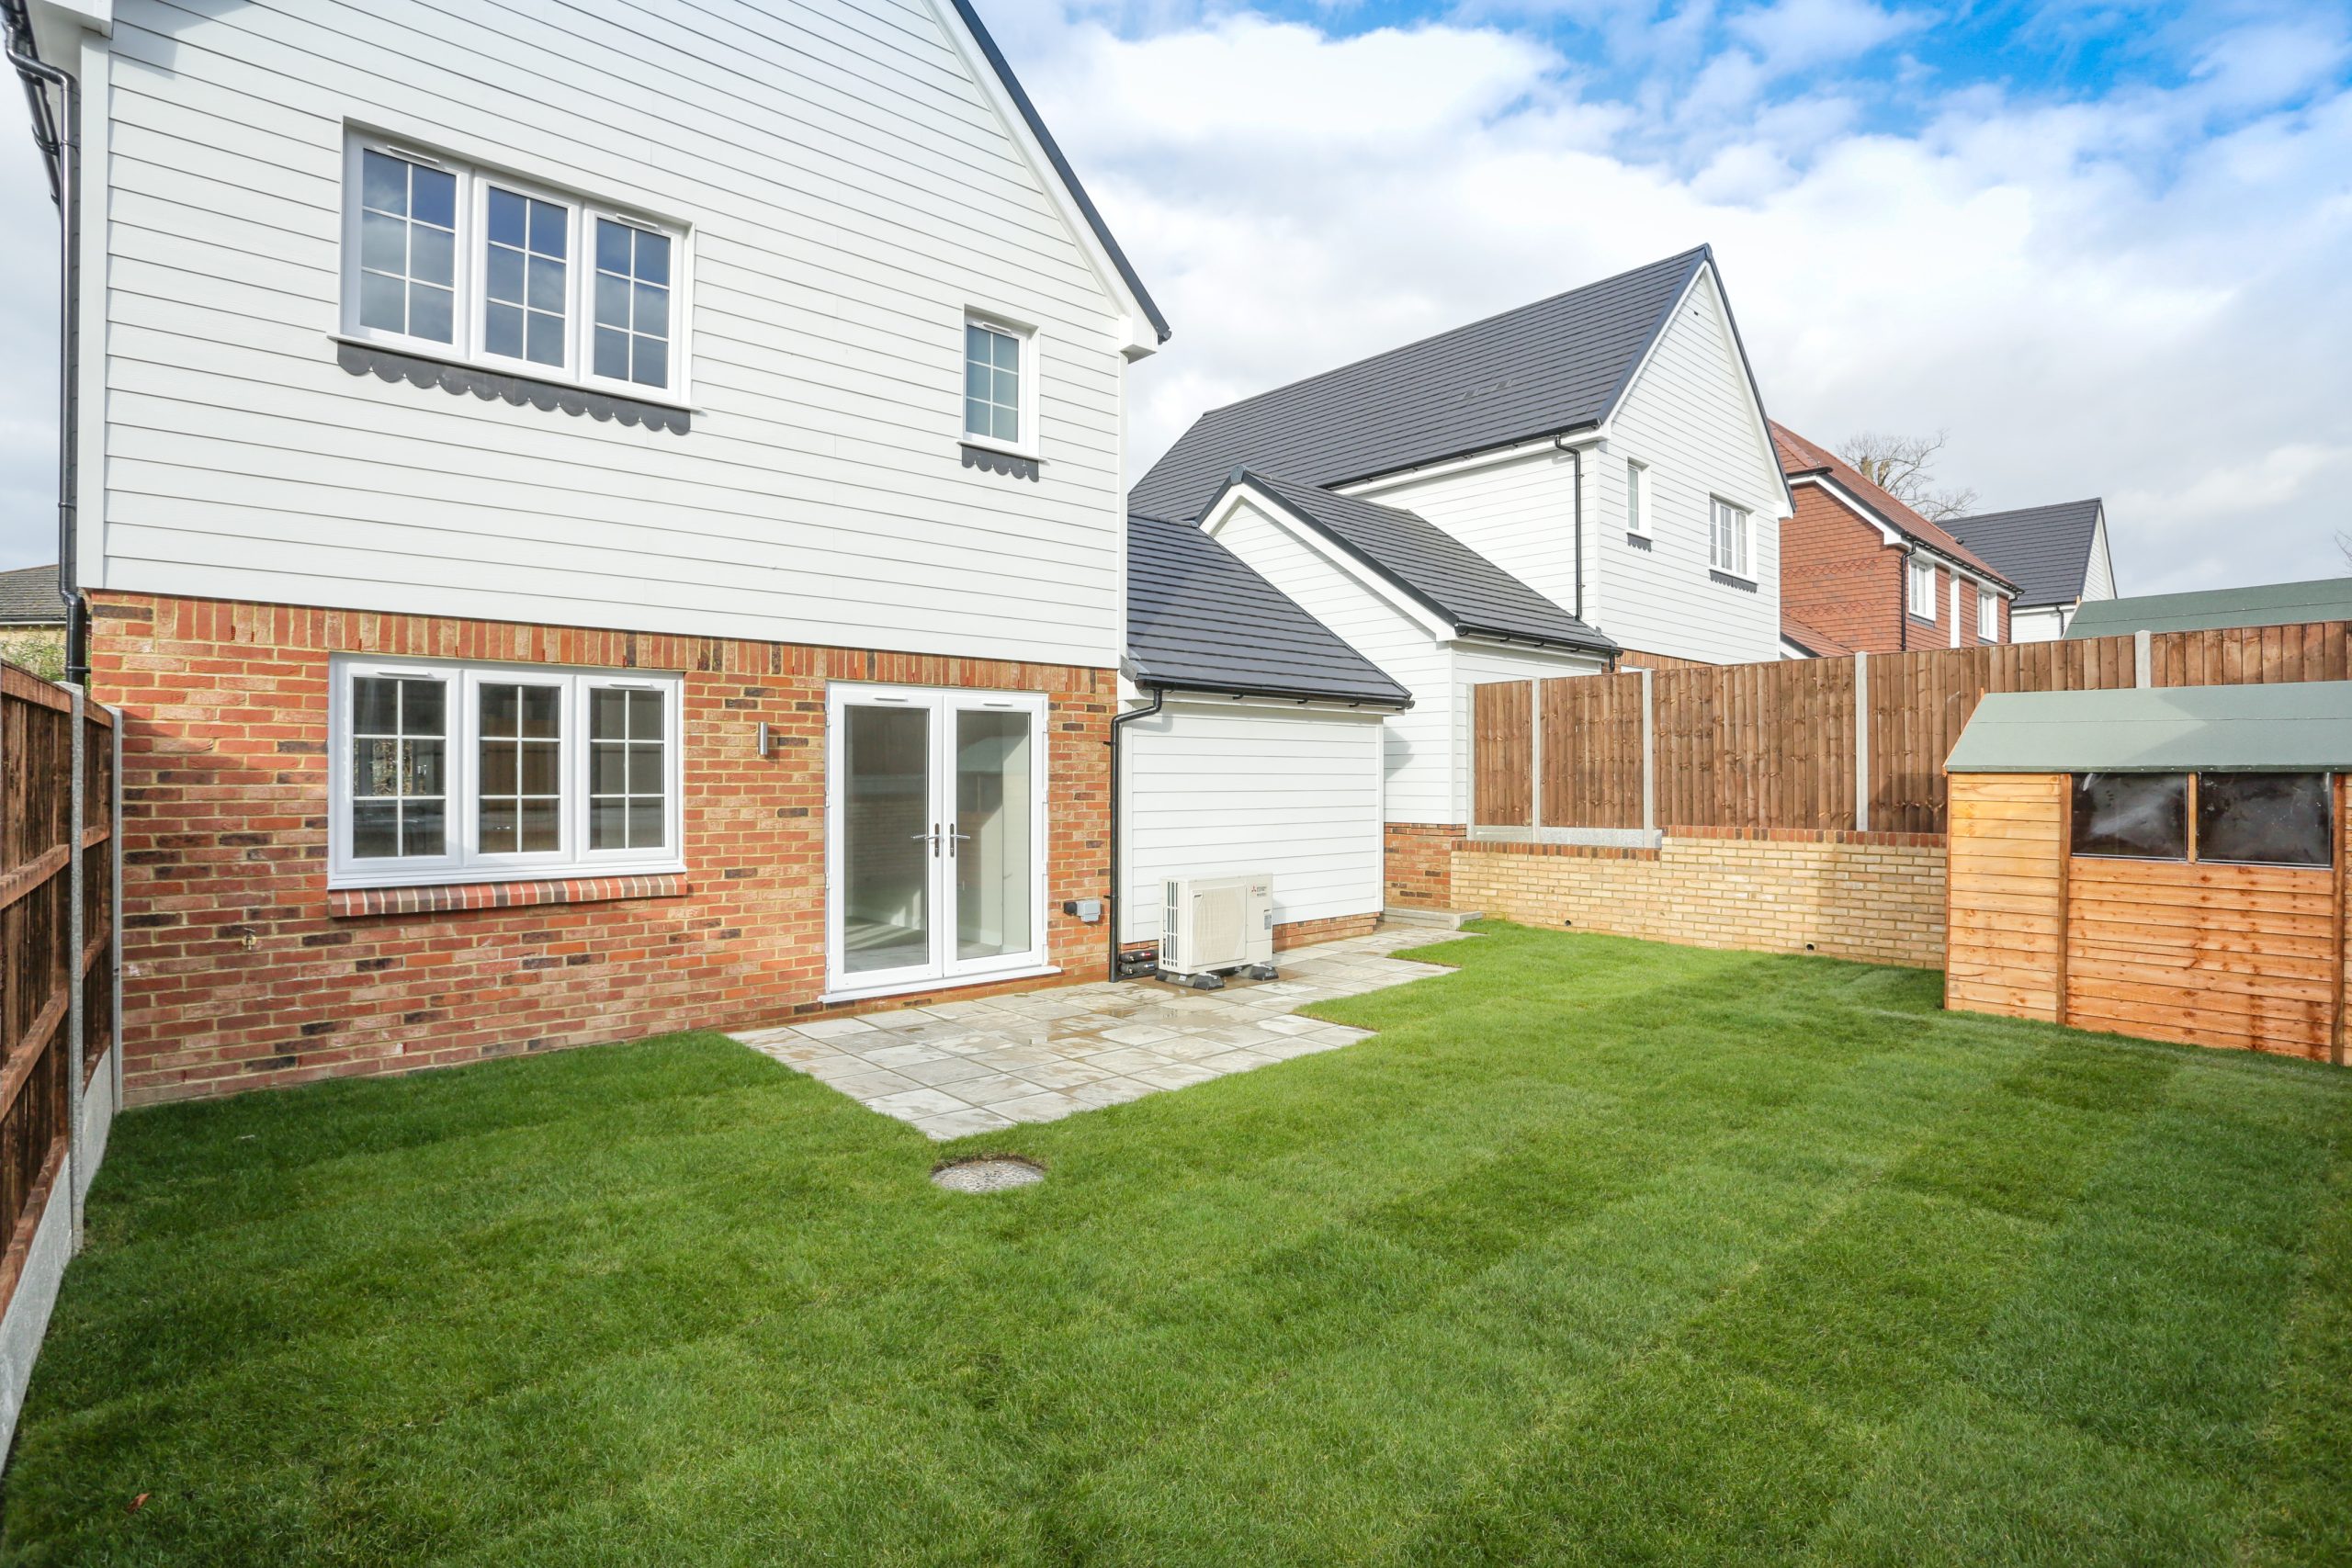 Rear garden with laid patio and lawn complete with shed at Ivy court